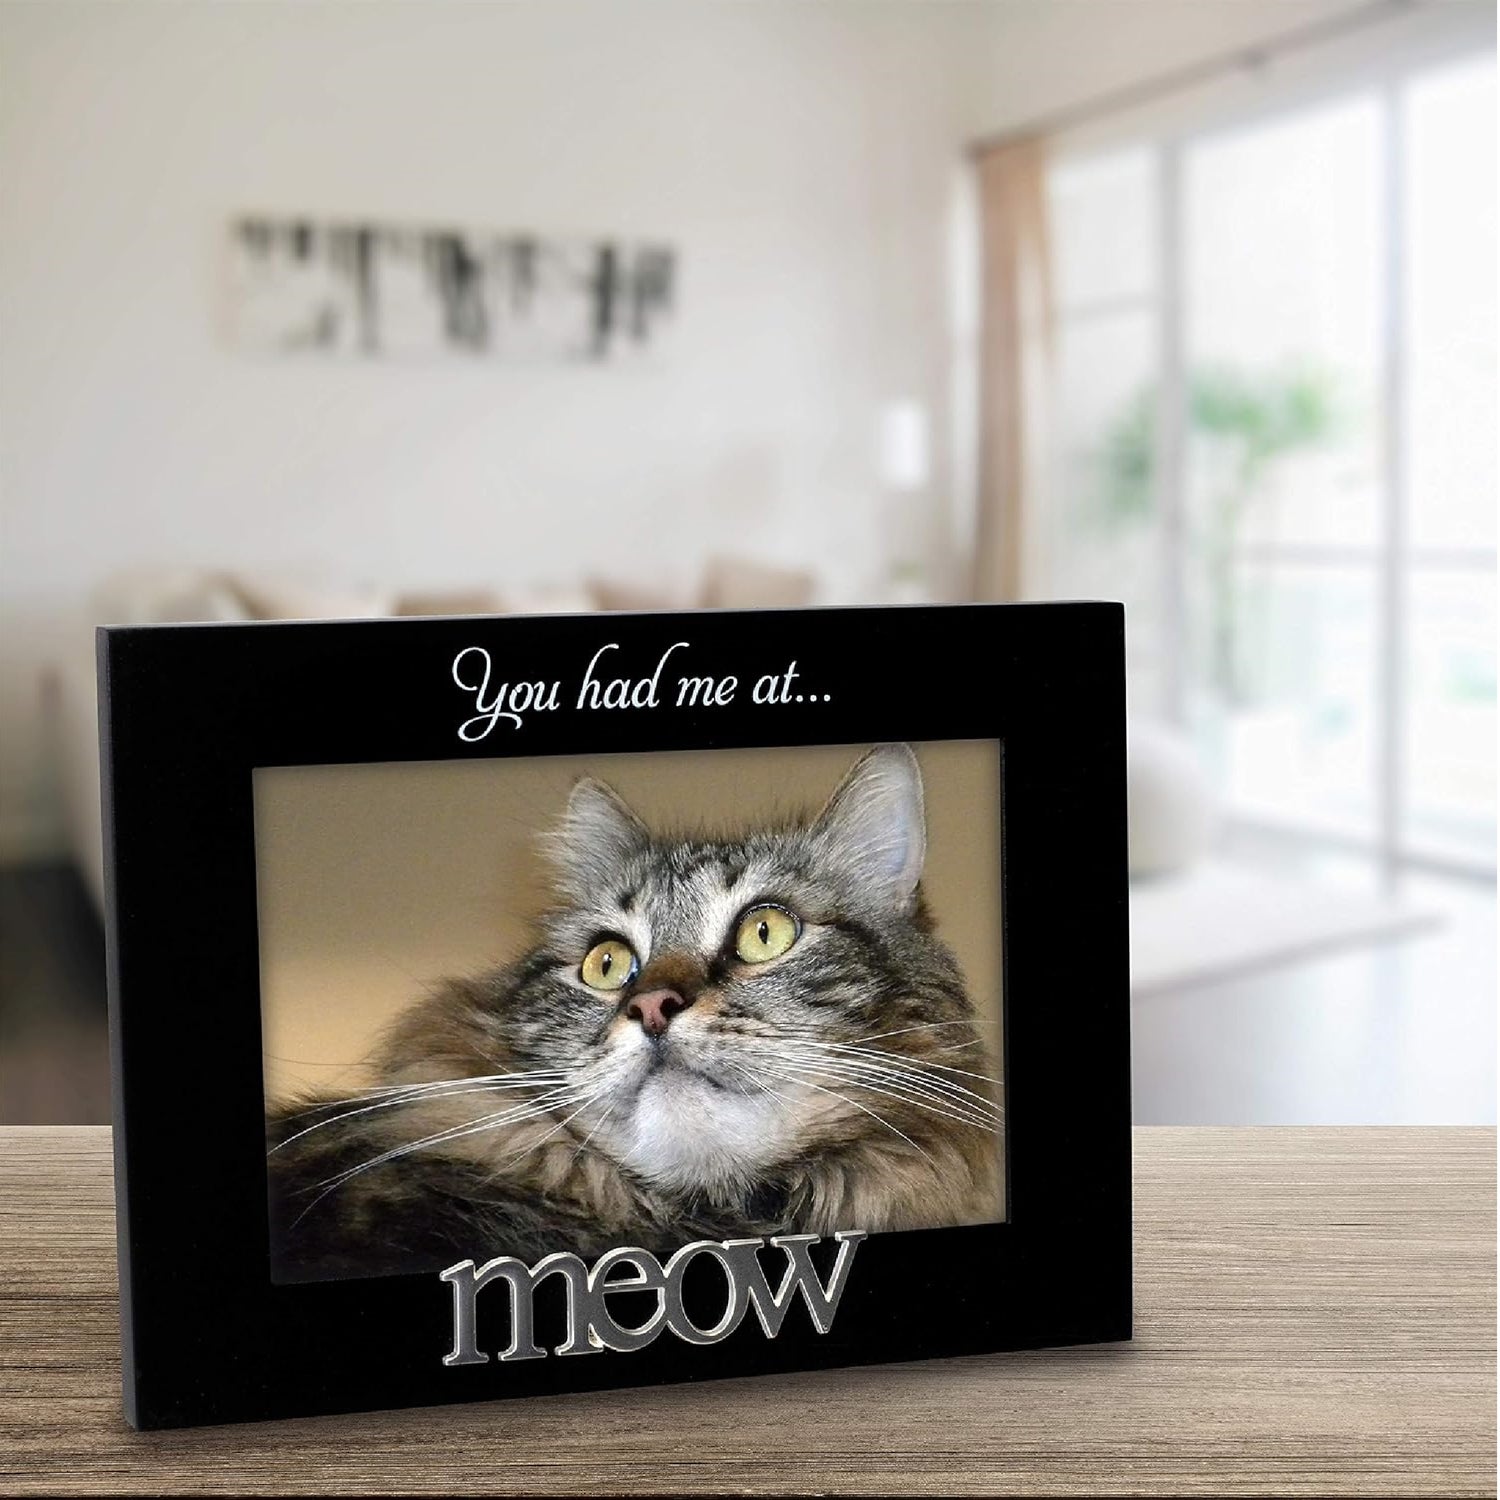 Malden "You had me at Meow" Expressions Photo Frame